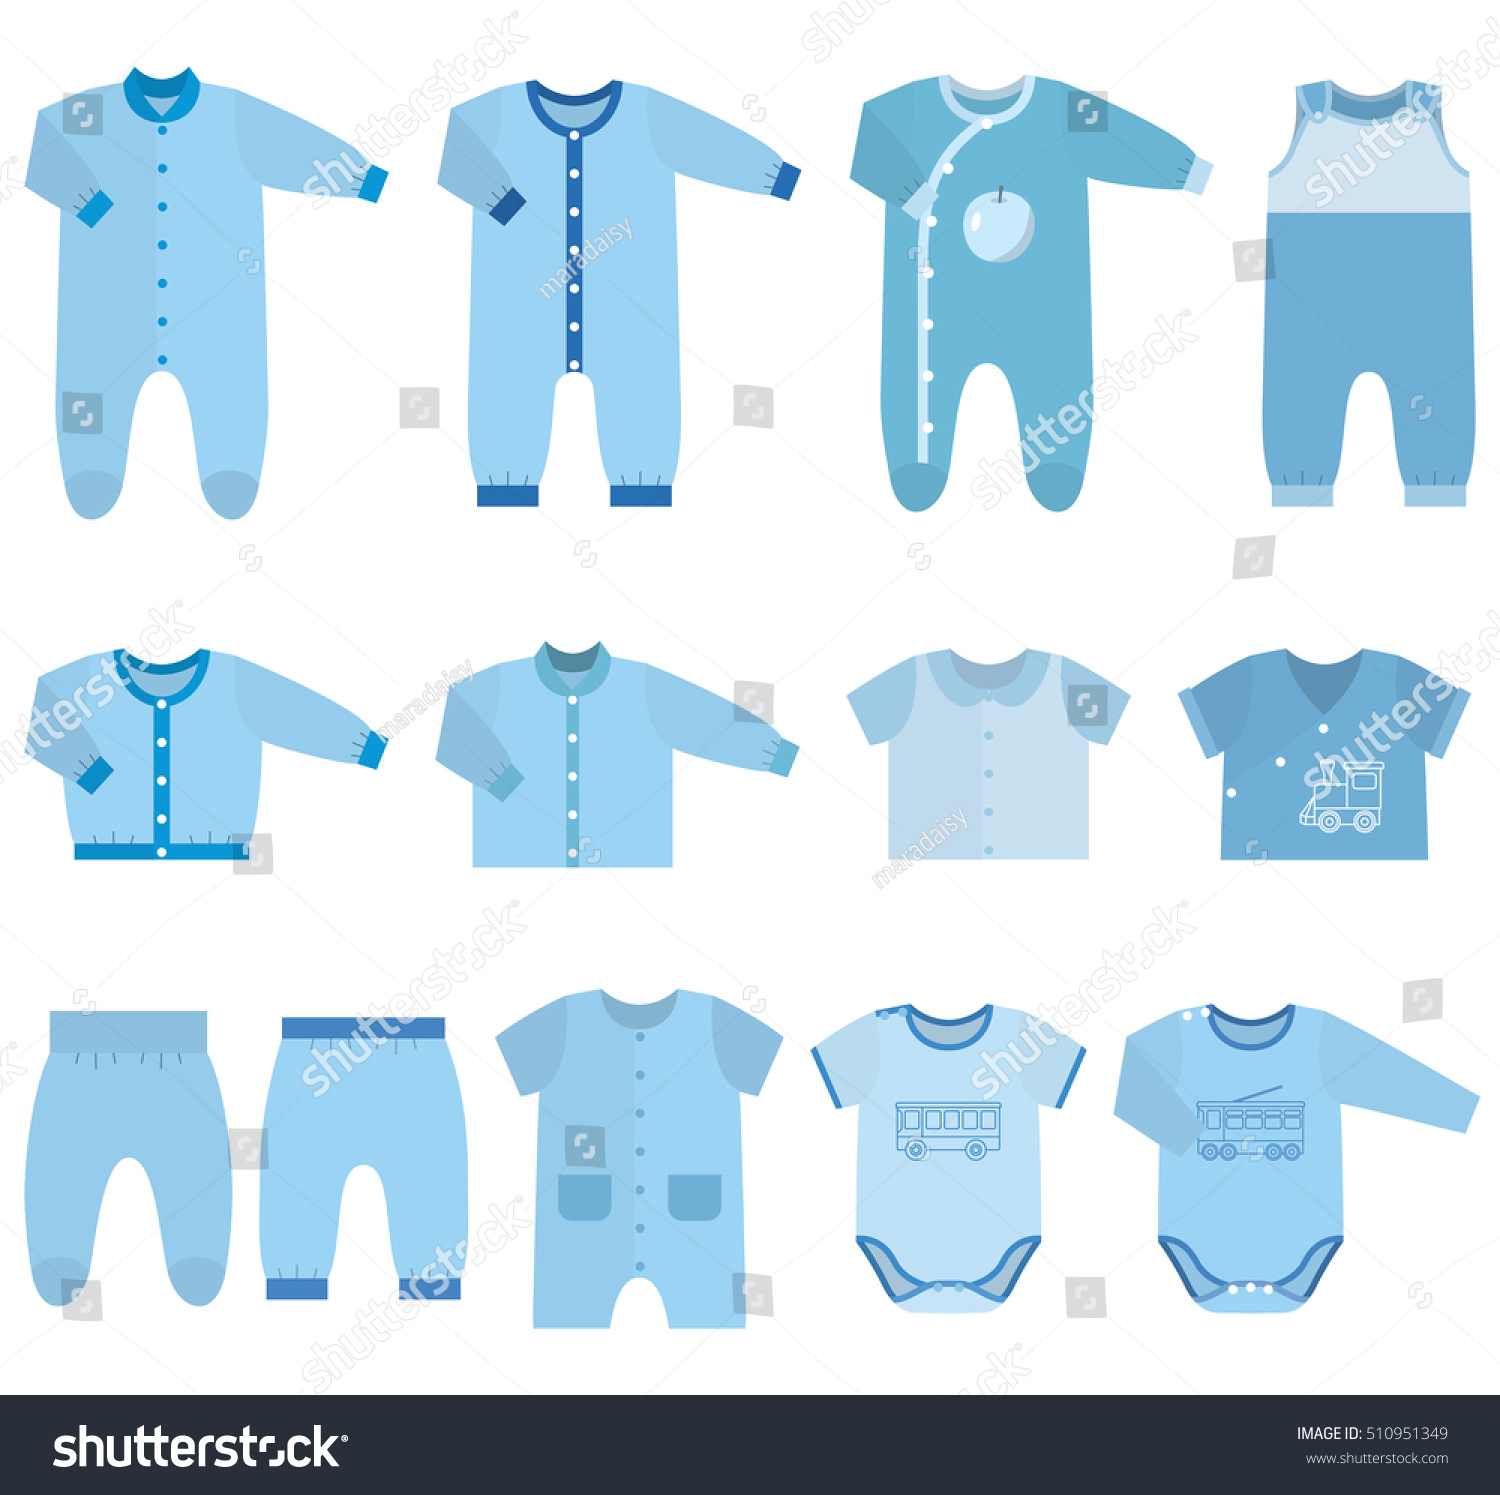 Baby Clothes Garments Infant Kids Sketches Stock Vector (Royalty Free ...